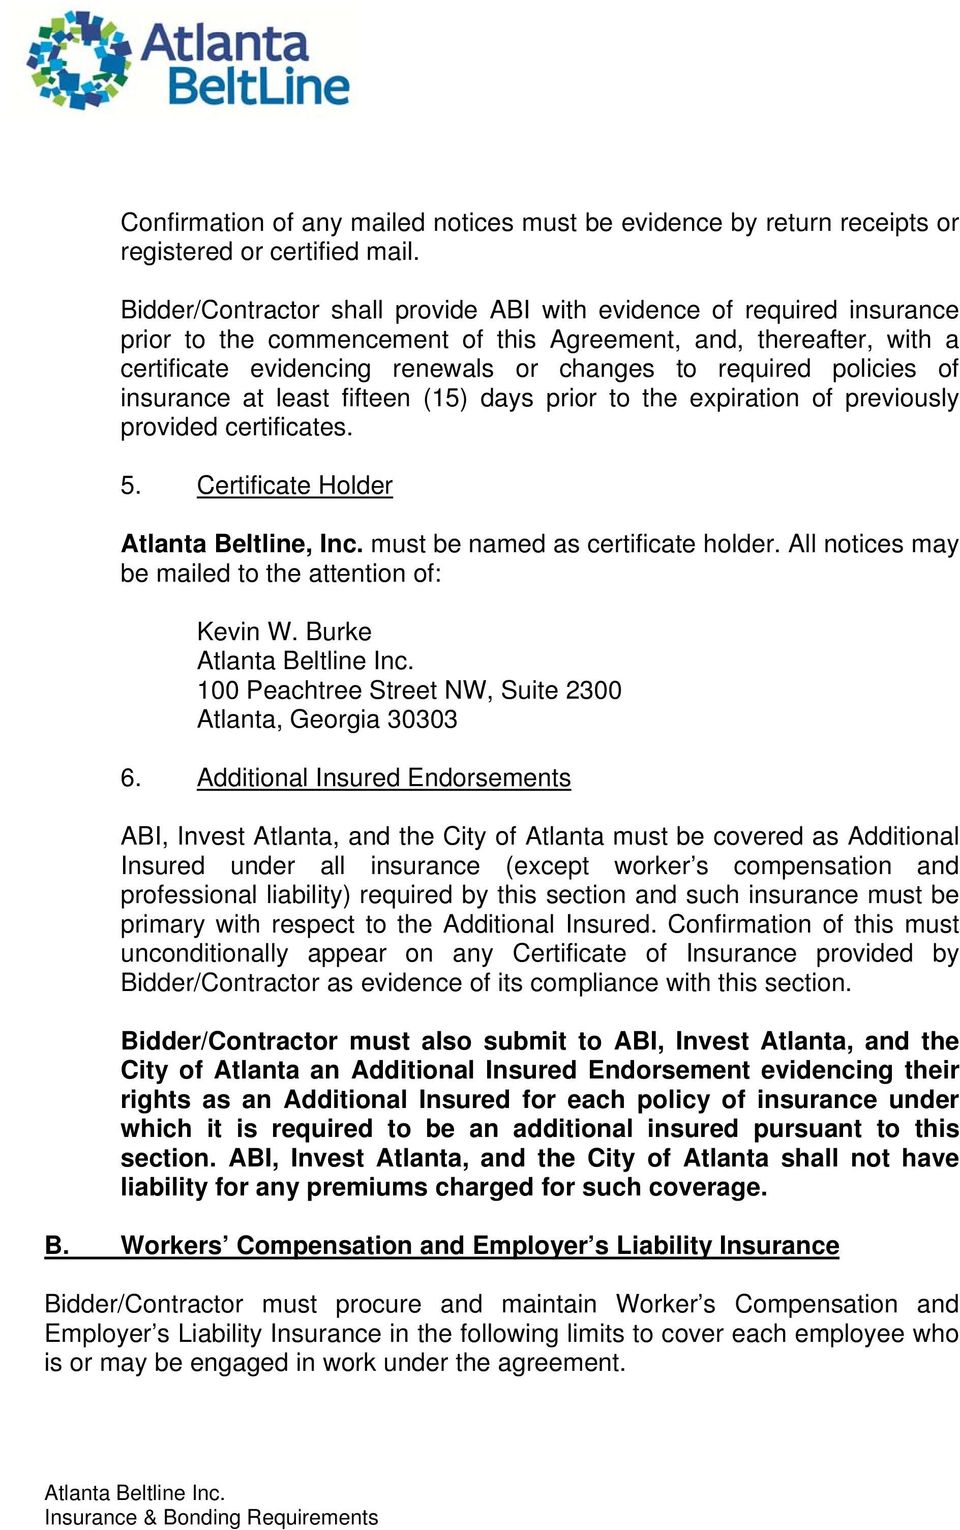 policies of insurance at least fifteen (15) days prior to the expiration of previously provided certificates. 5. Certificate Holder Atlanta Beltline, Inc. must be named as certificate holder.